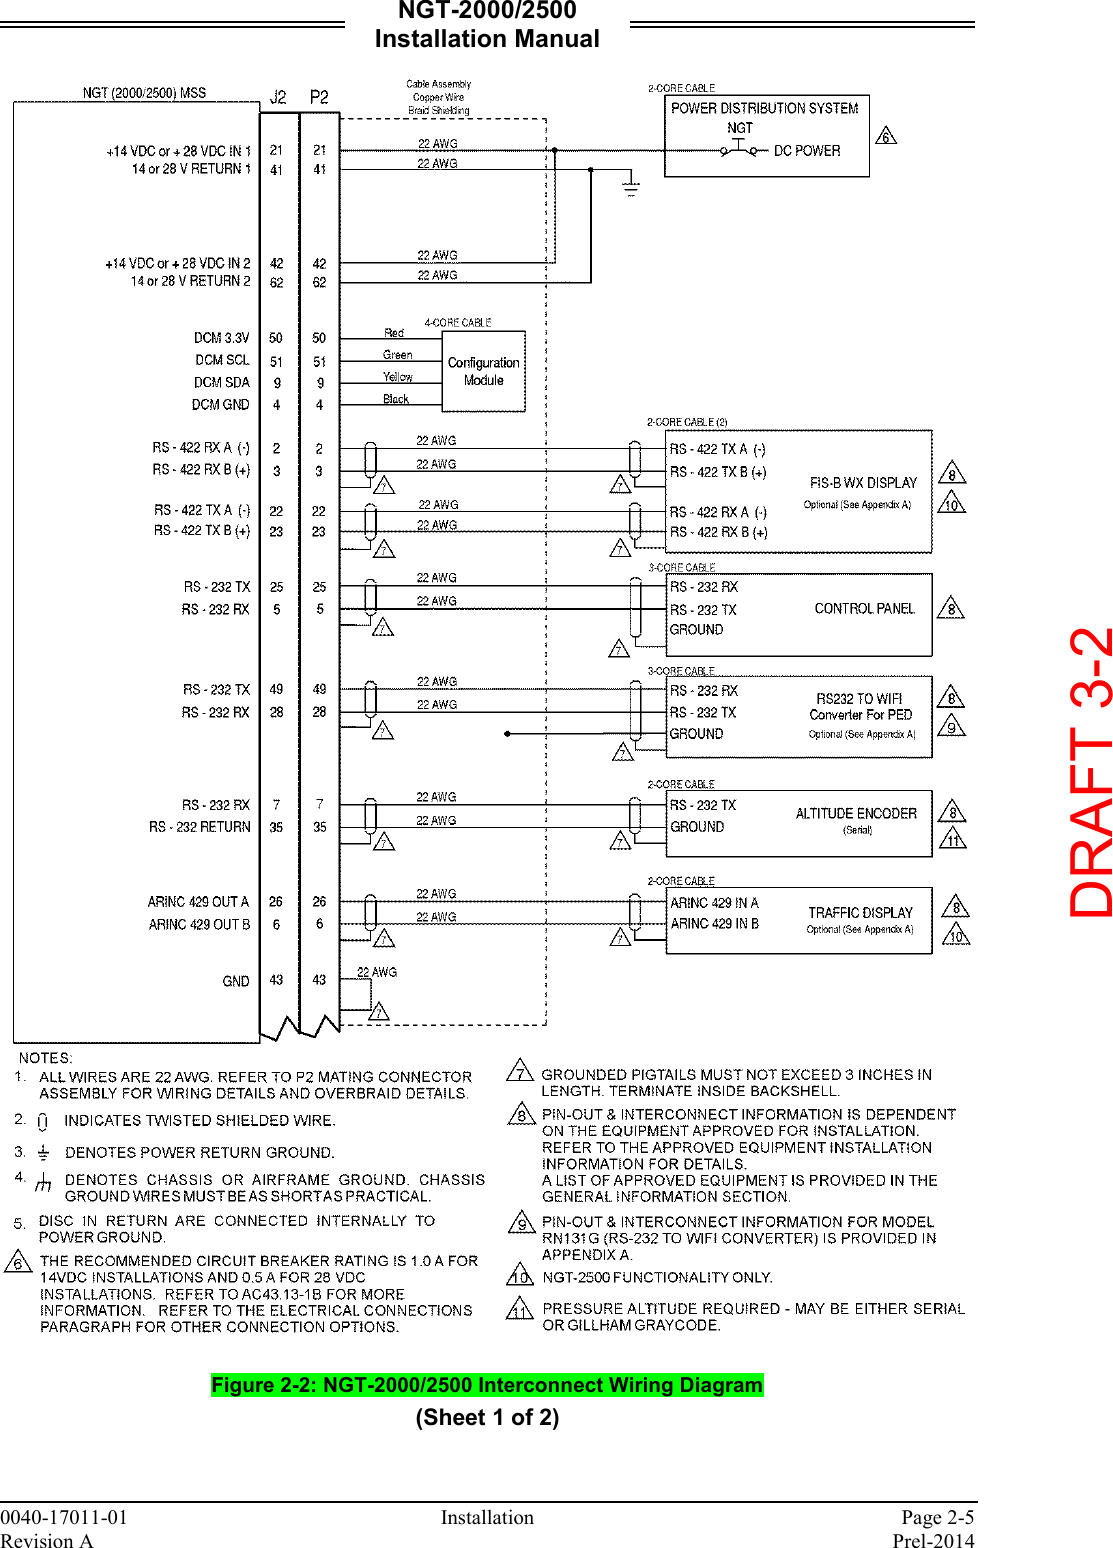 NGT-2000/2500 Installation Manual  0040-17011-01    Installation  Page 2-5 Revision A    Prel-2014   Figure 2-2: NGT-2000/2500 Interconnect Wiring Diagram (Sheet 1 of 2)   DRAFT 3-2